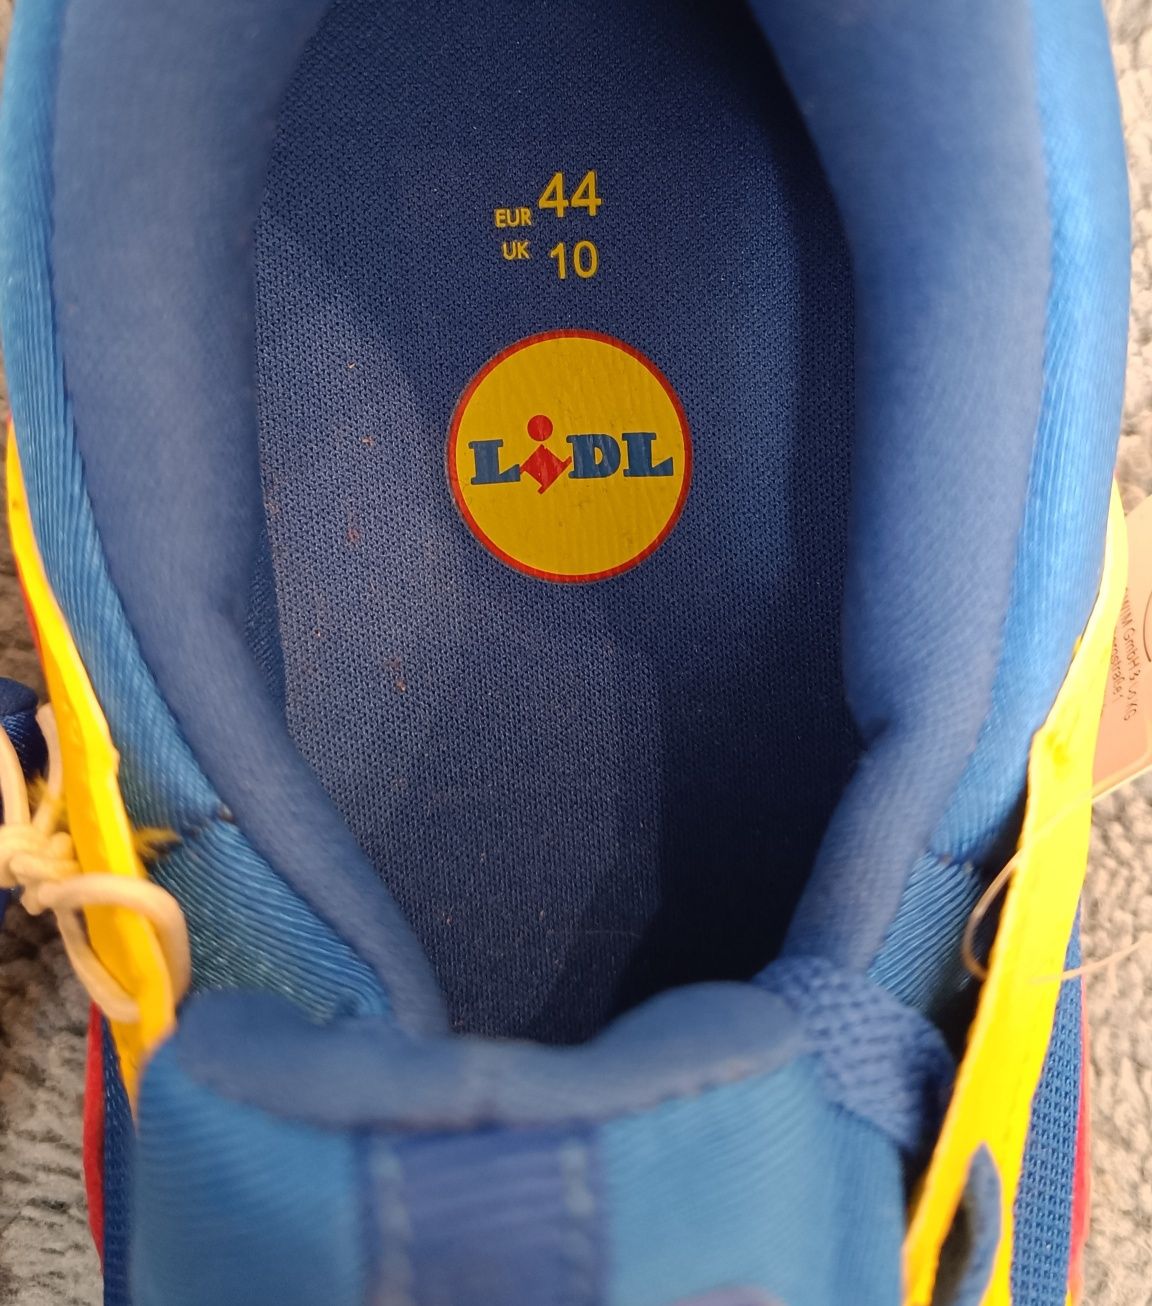 Lidl Trainers Limited Edition First Release 2020